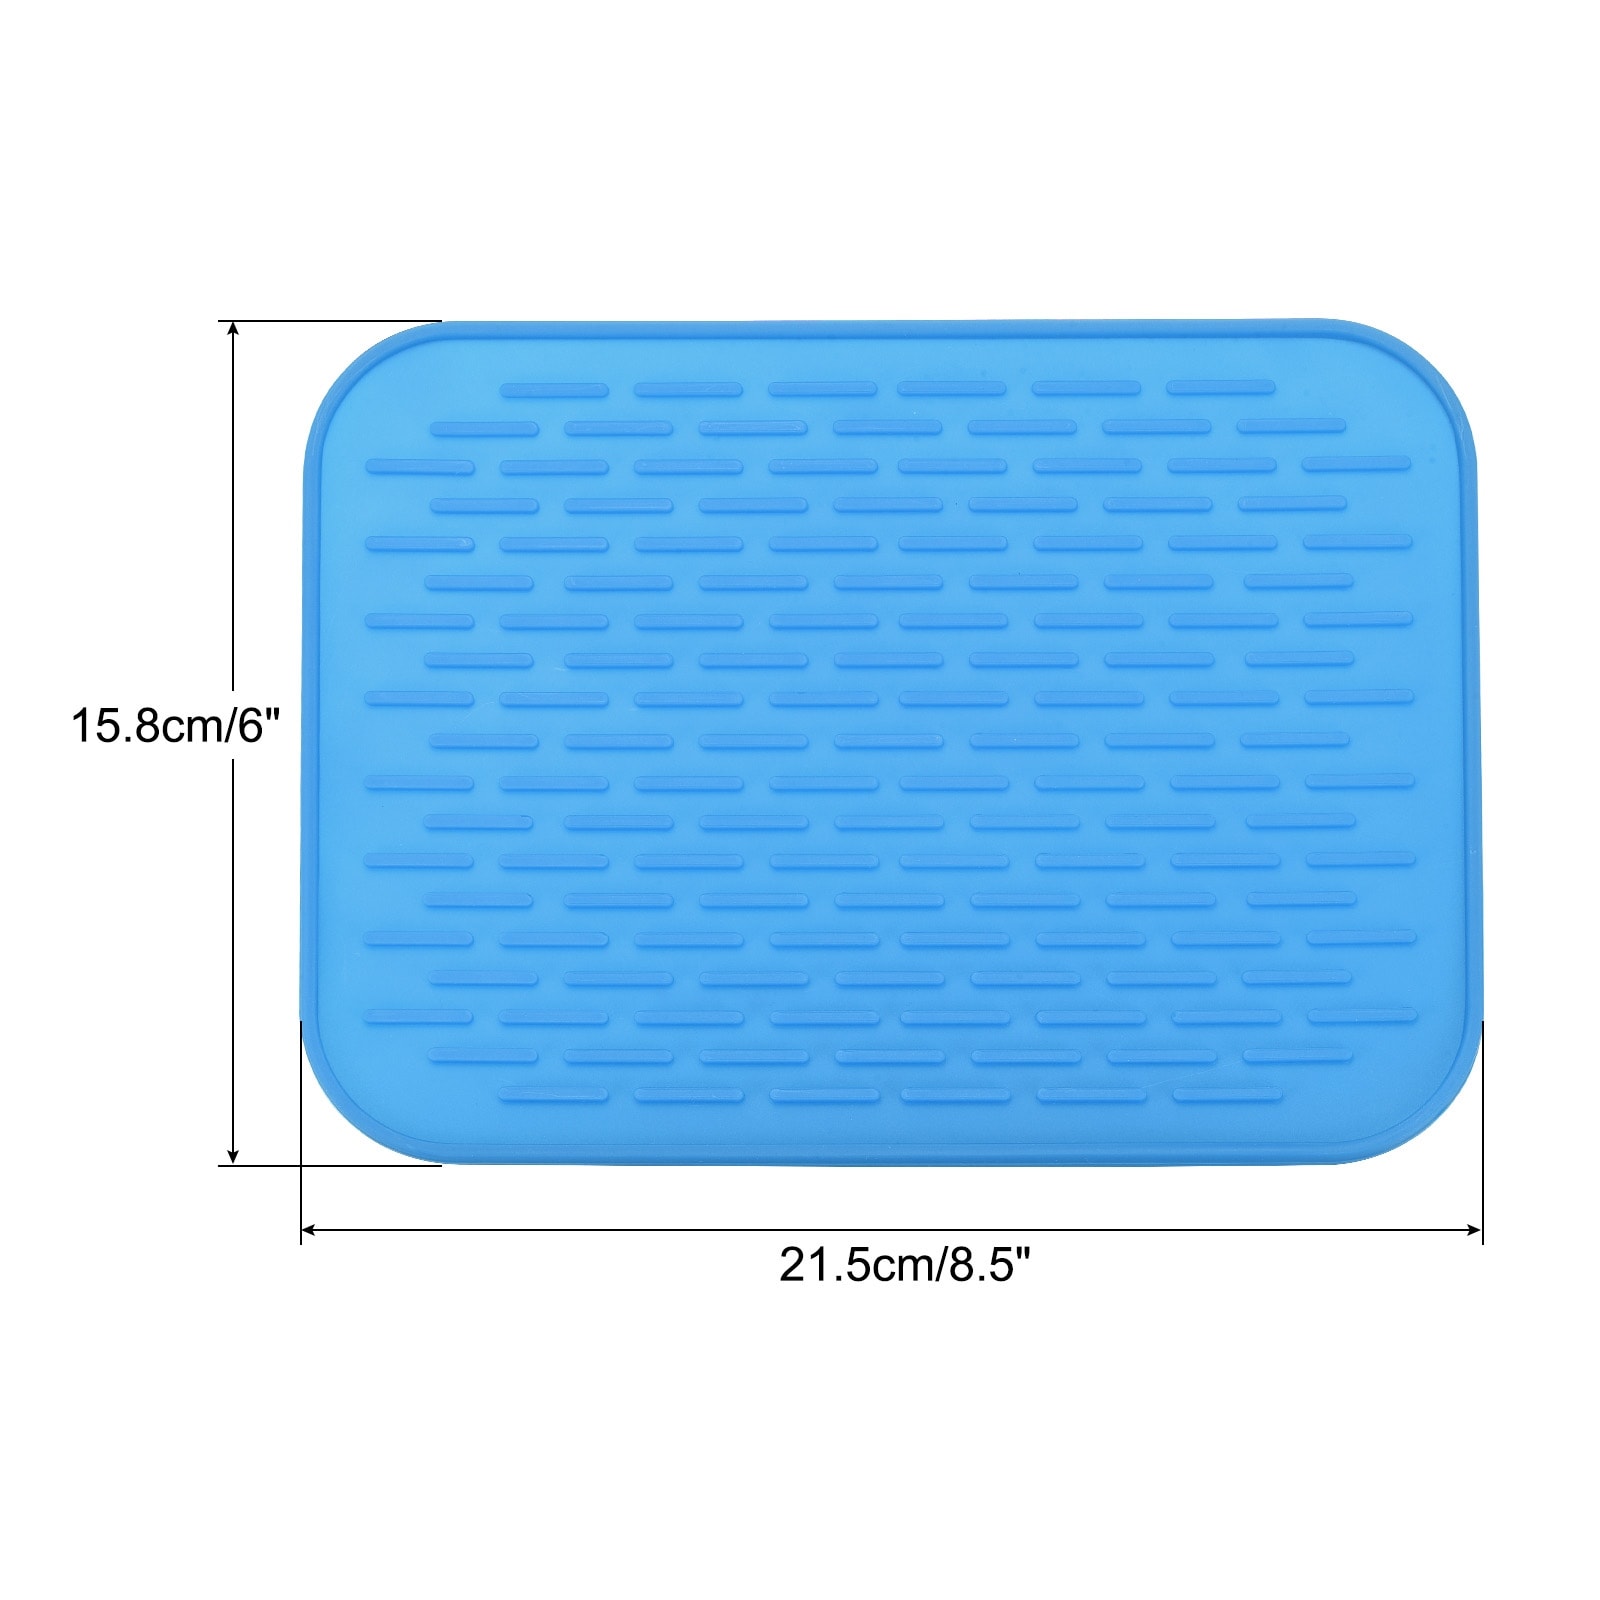 https://ak1.ostkcdn.com/images/products/is/images/direct/e3f34c3fe19f7a22c97c1eb0d23db7210675e96e/Silicone-Dish-Drying-Mat%2C-Under-Sink-Drain-Pad-Heat-Resistant-Non-Slipping-Suitable-for-Kitchen-Counter%2C-Sink%2C-Fridge%2C-Drawer.jpg